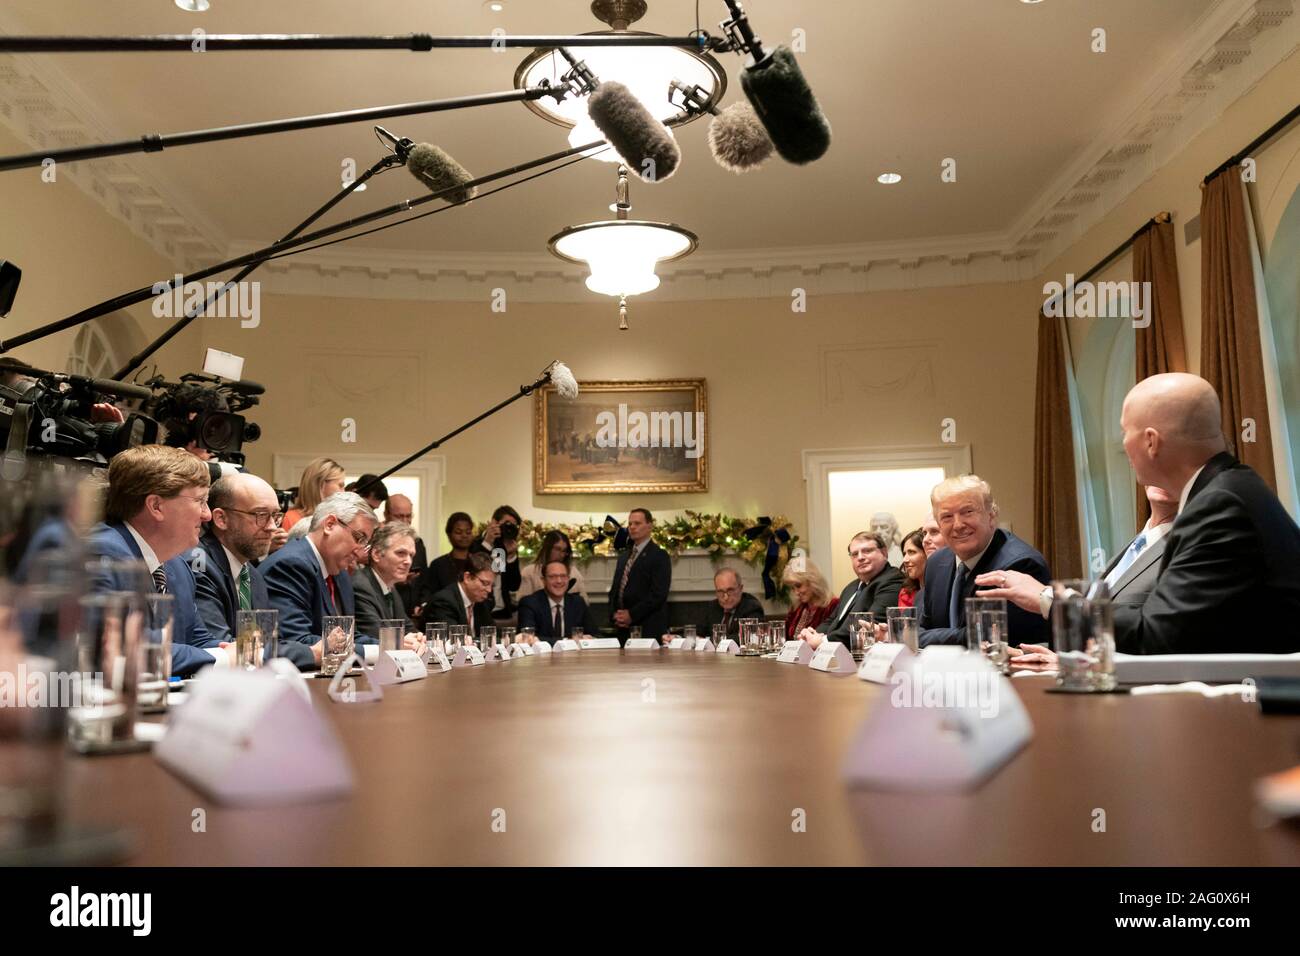 Washington, United States of America. 16 December, 2019. U.S President Donald Trump and Vice President Mike Pence host a roundtable on on the Governors Initiative on Regulatory Innovation in the Cabinet Room of the White House December 16, 2019 in Washington, DC.  Credit: Tia Dufour/White House Photo/Alamy Live News Stock Photo